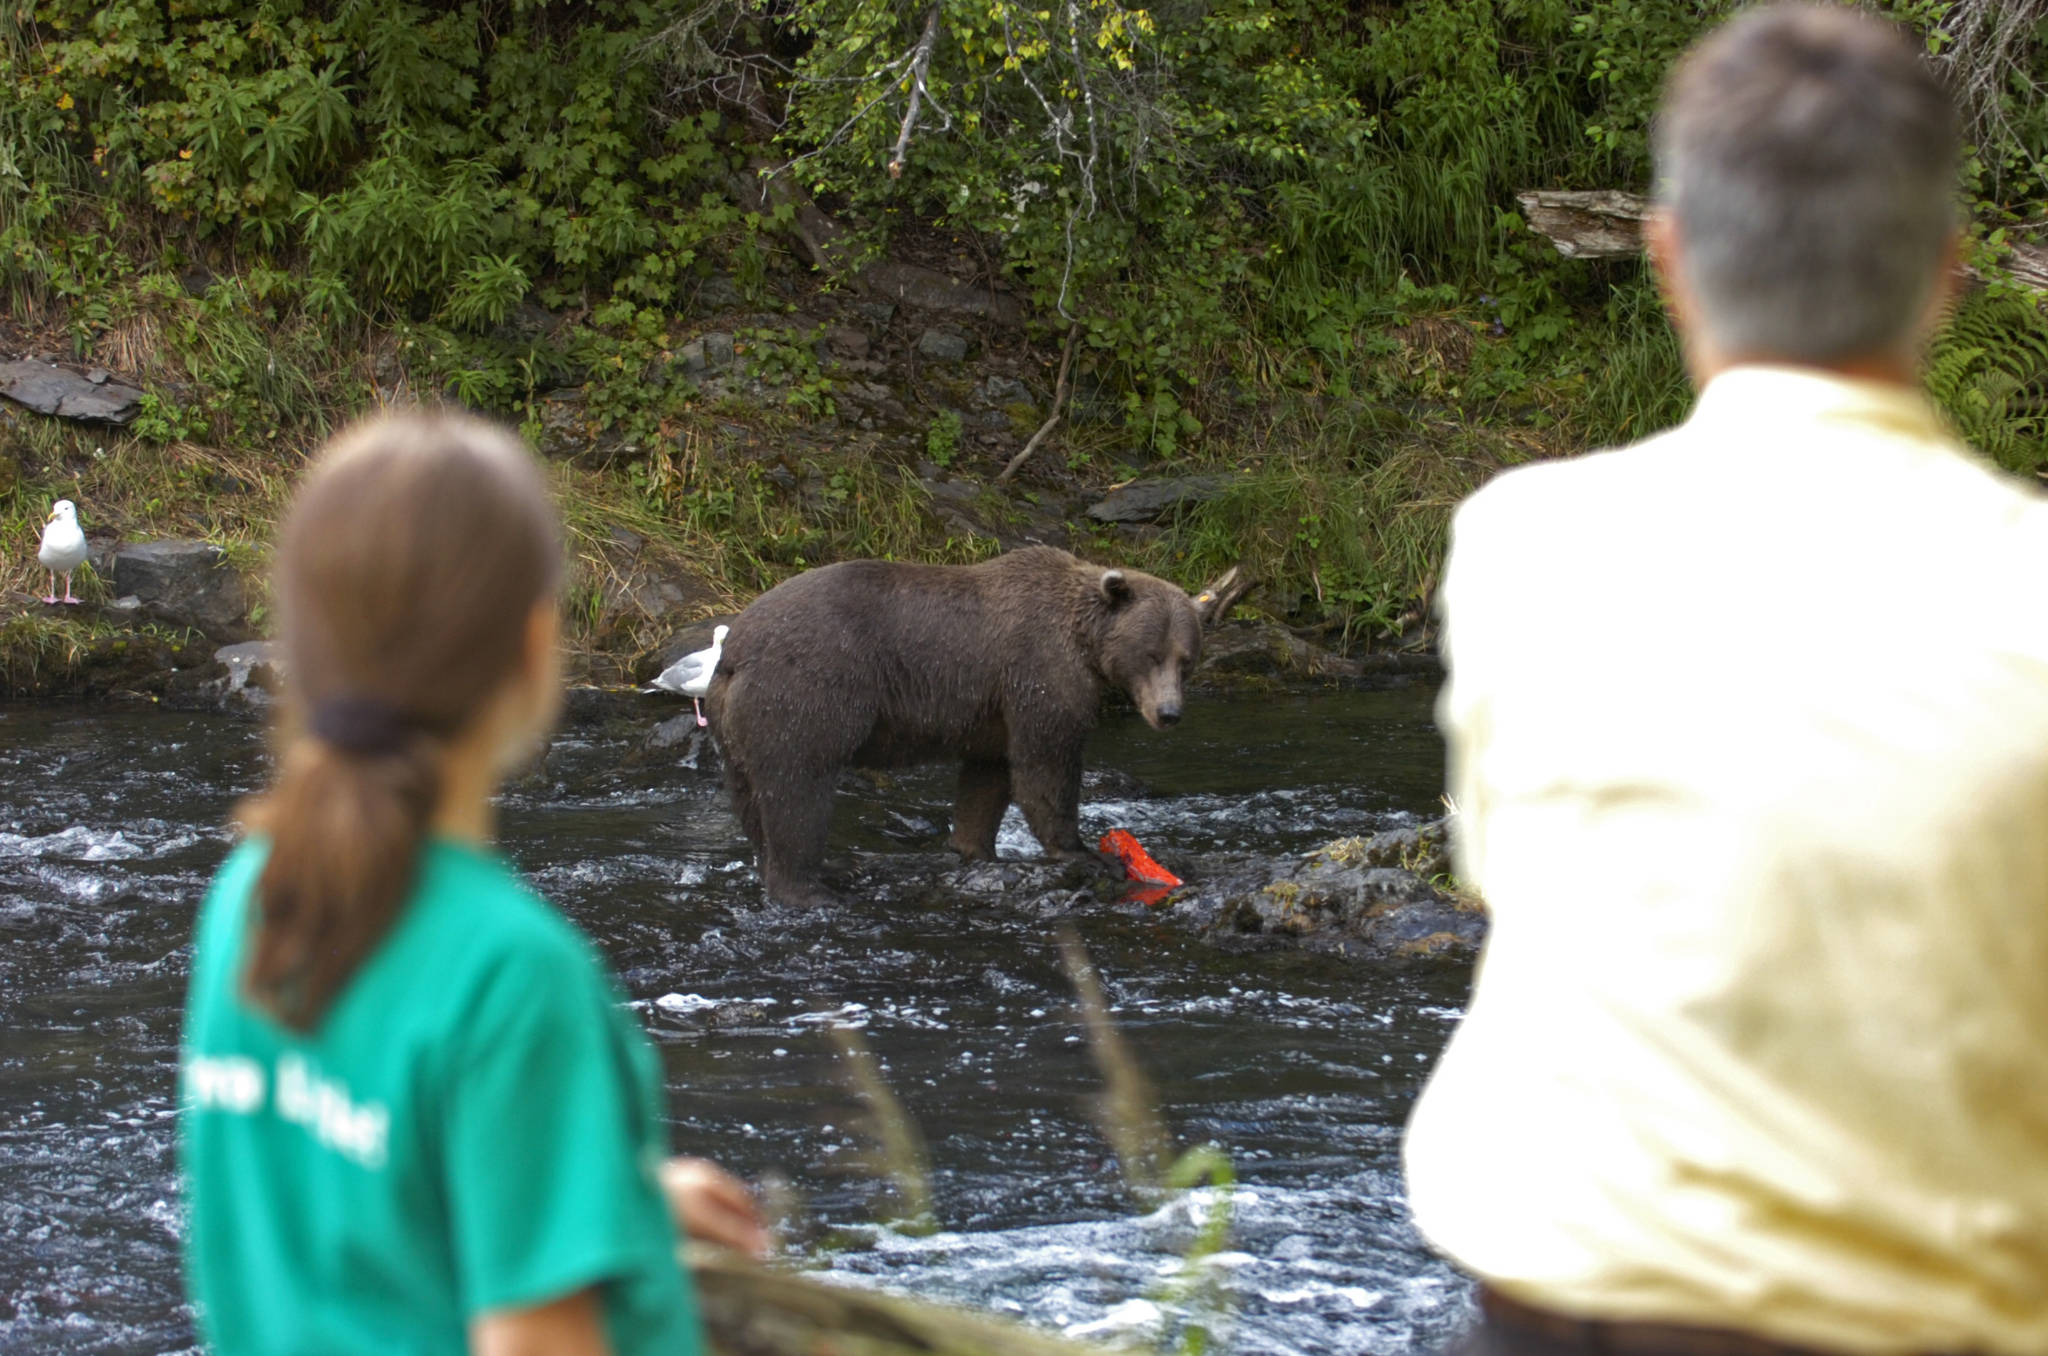 In this Aug. 10, 2008 file photo, hikers watch a brown bear fish on the Russian River near the falls near Cooper Landing, Alaska. Human-bear interactions are a fact of life in Alaska. (Clarion file photo)